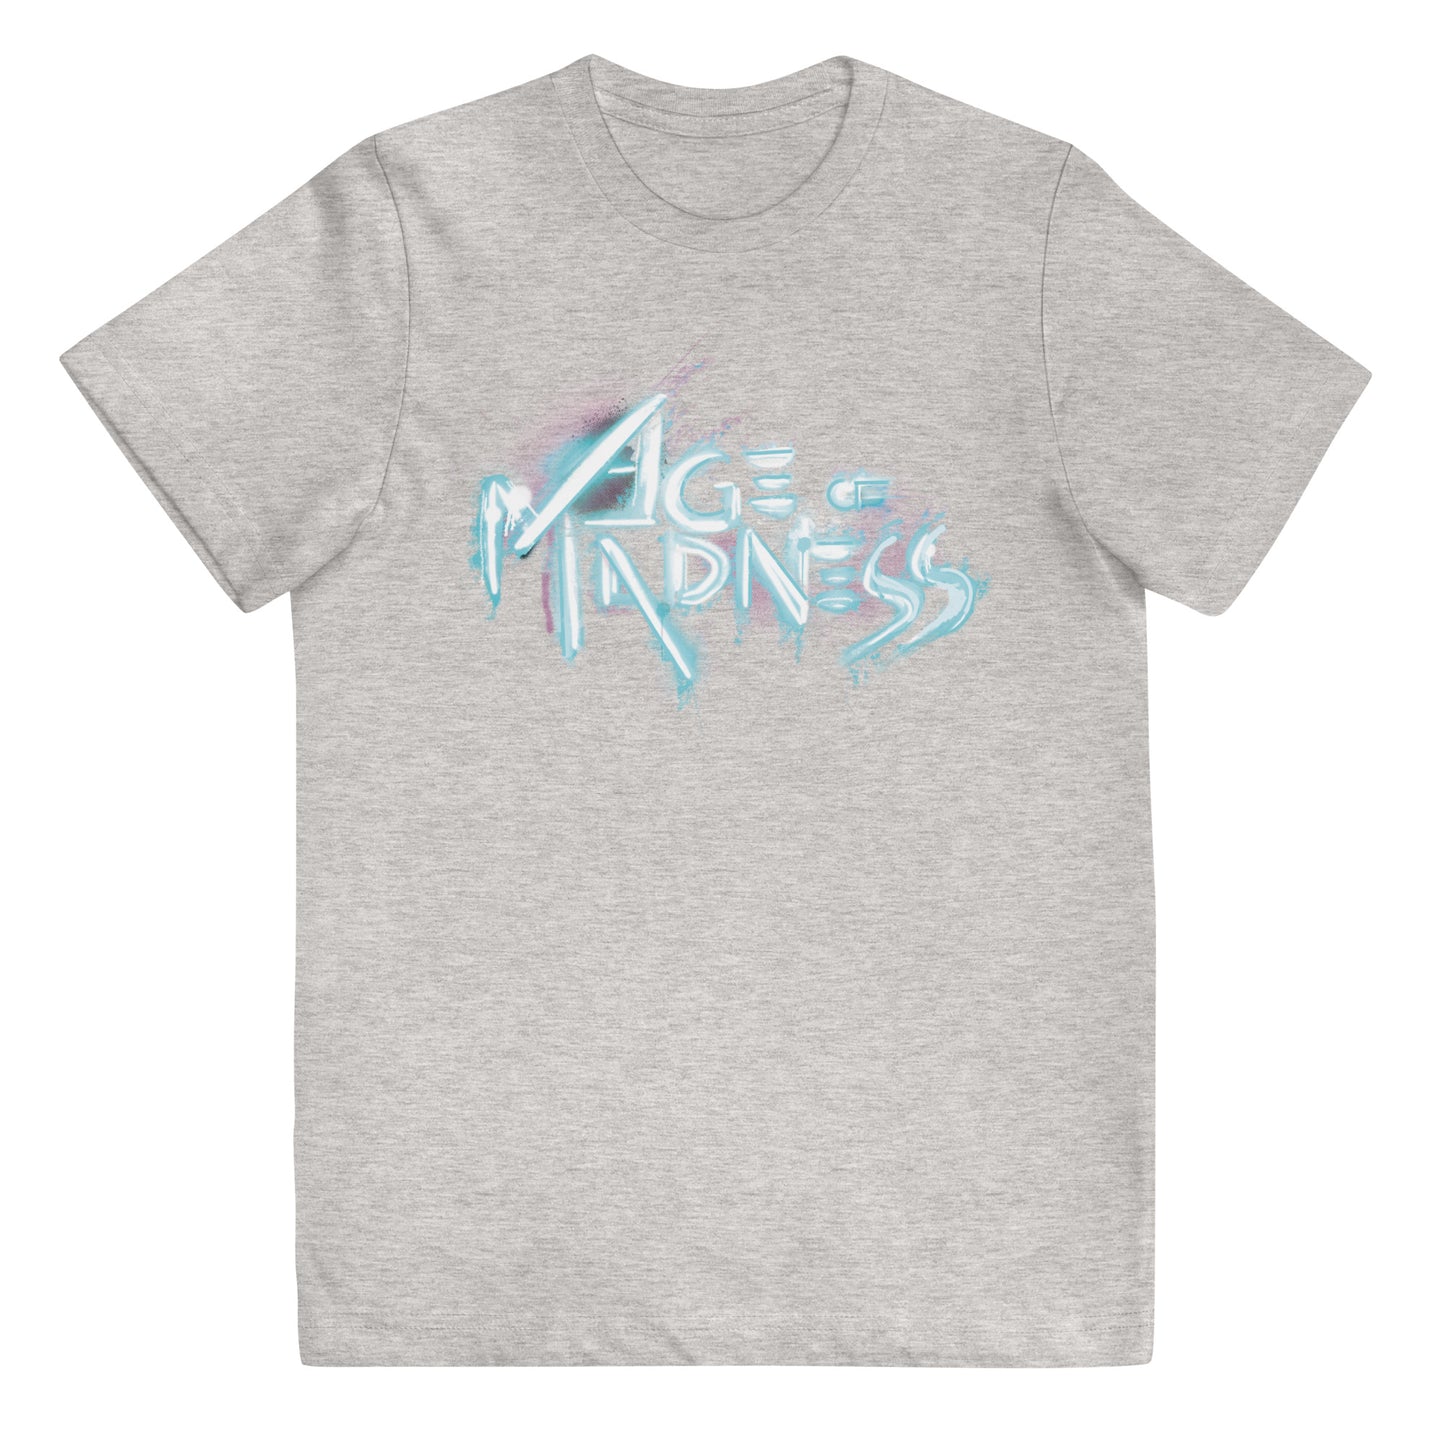 Youth jersey t-shirt Age of Madness